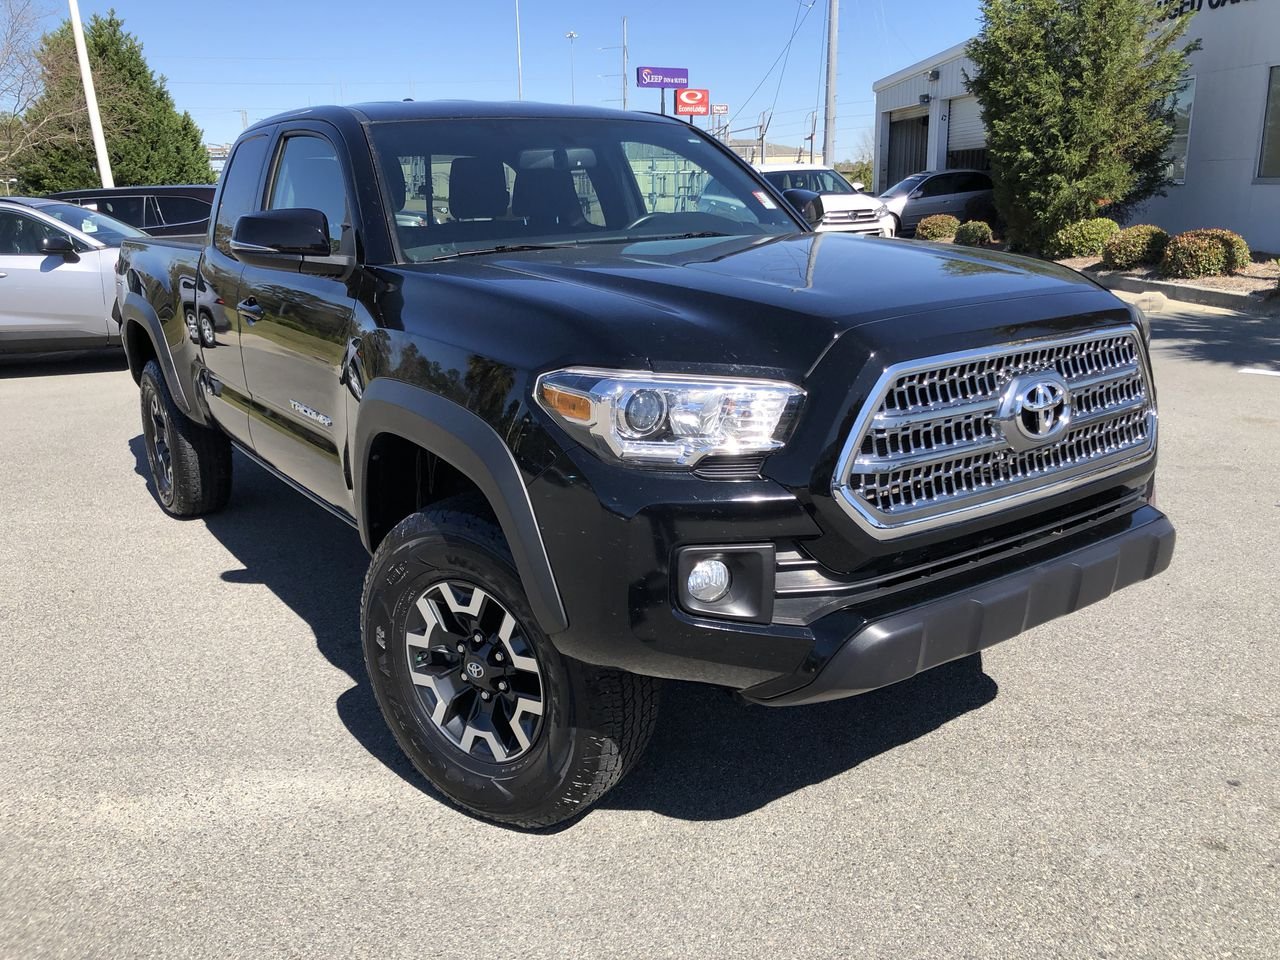 Certified Pre-Owned 2017 Toyota Tacoma TRD Off Road Access Cab 4WD